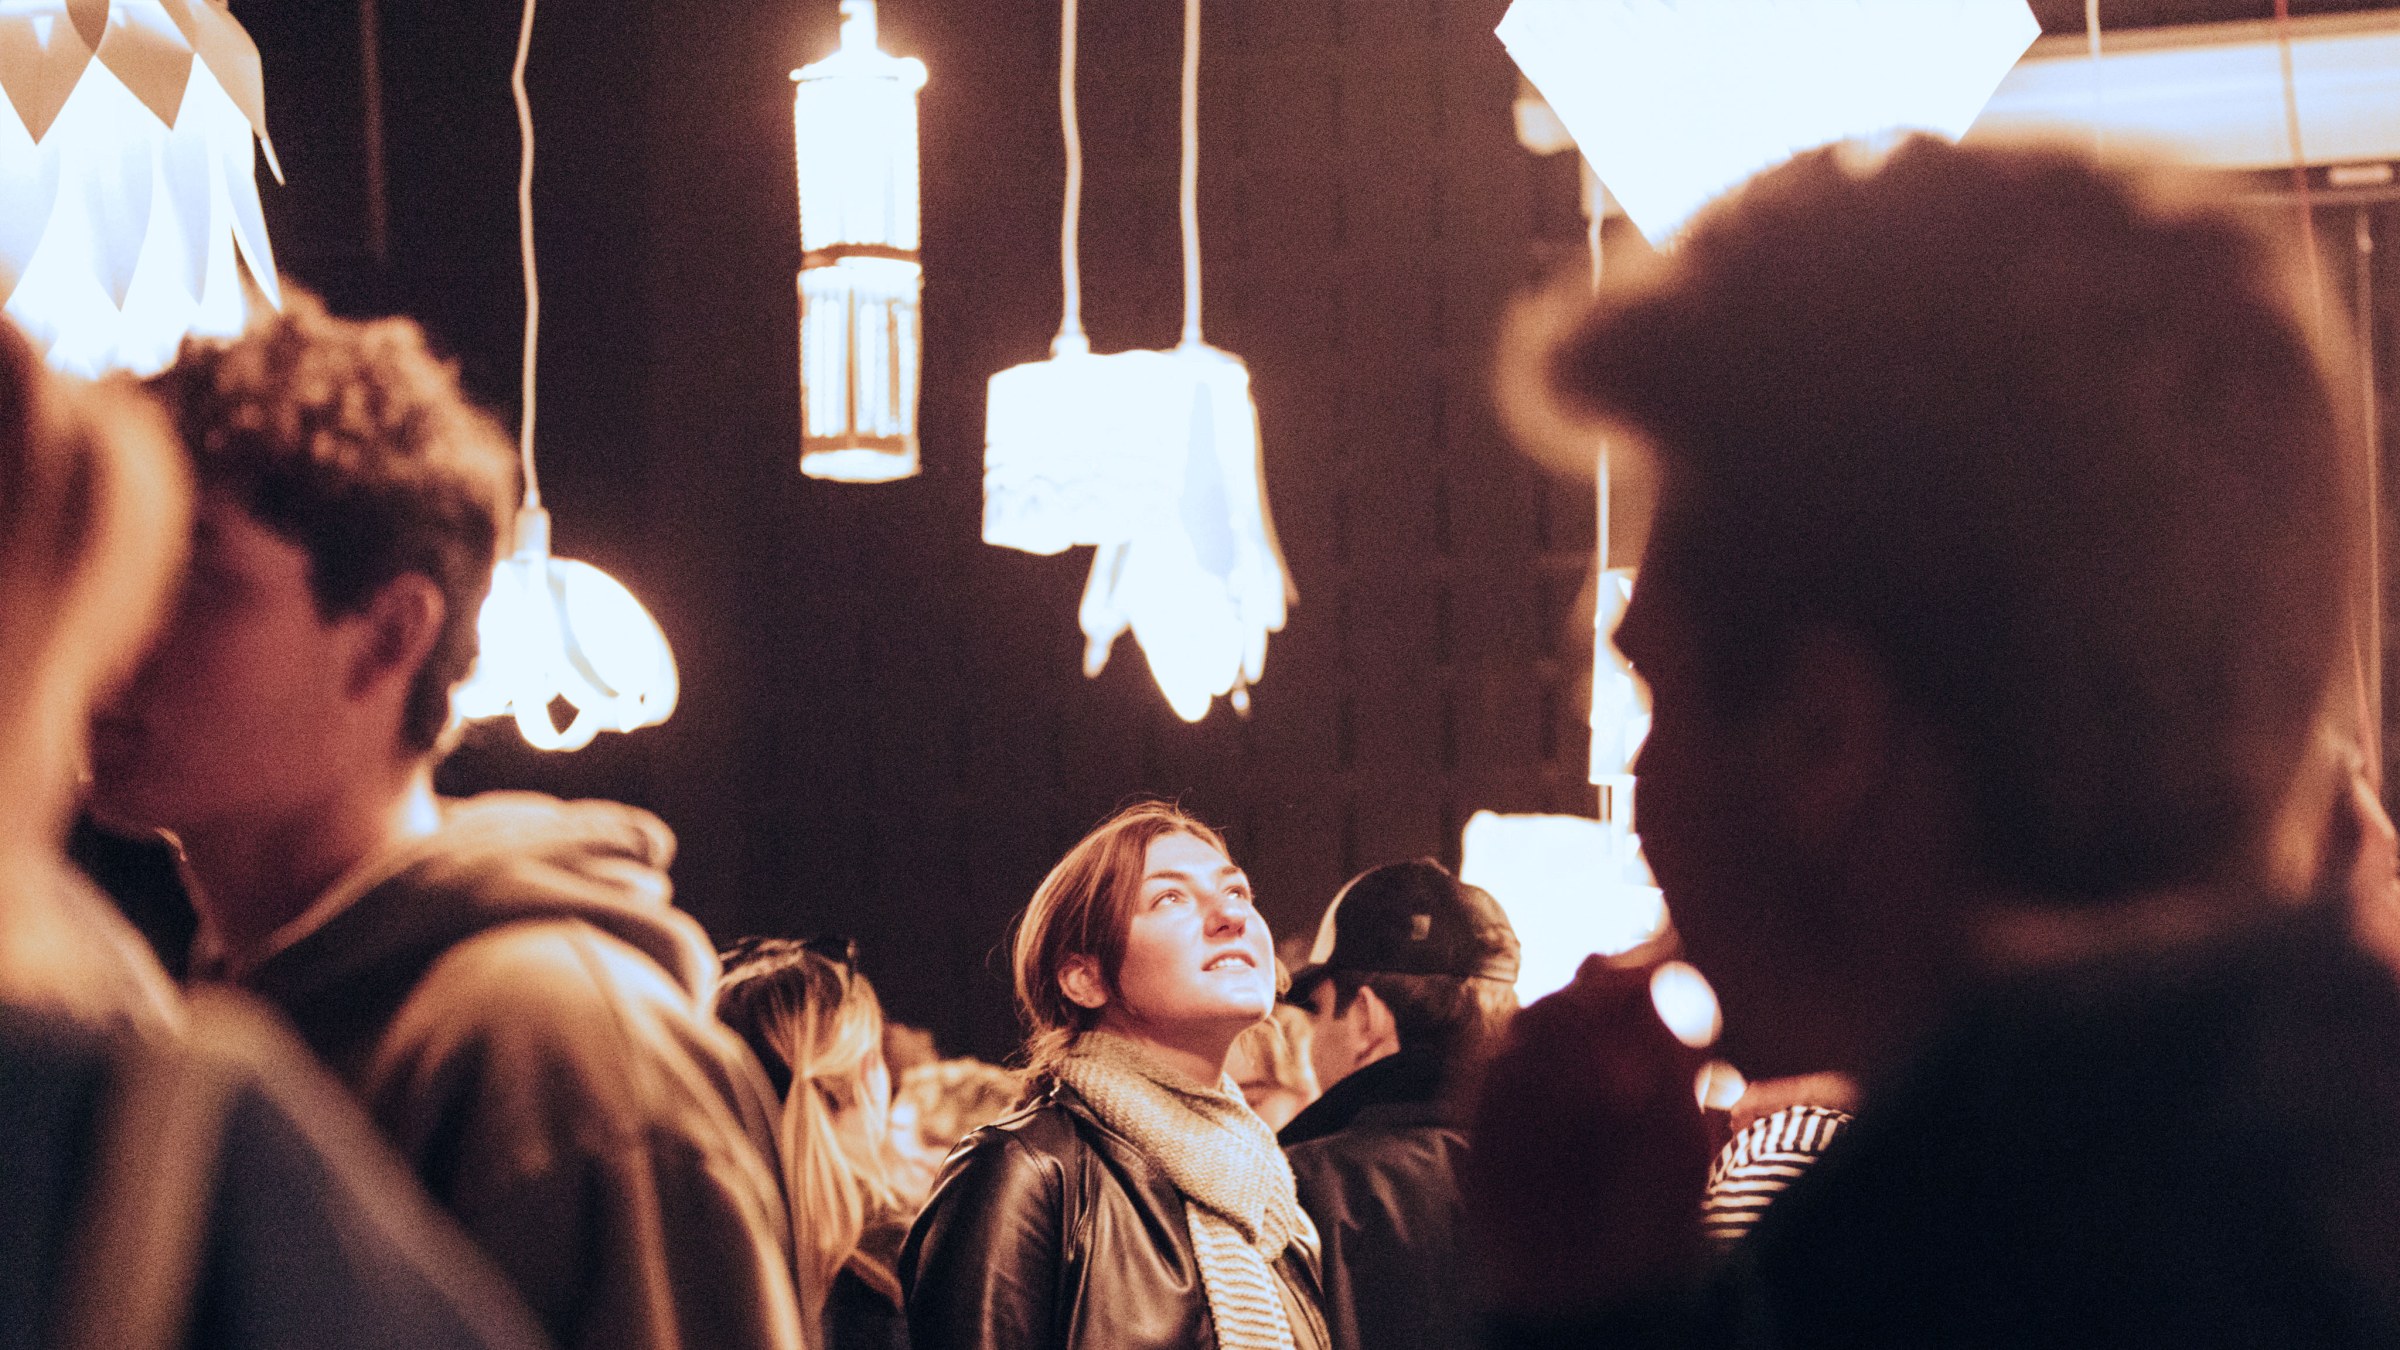 Light fixtures hang from the ceiling of a dark large crowded room, with one student looking up at a fixture in the center focus of the frame.